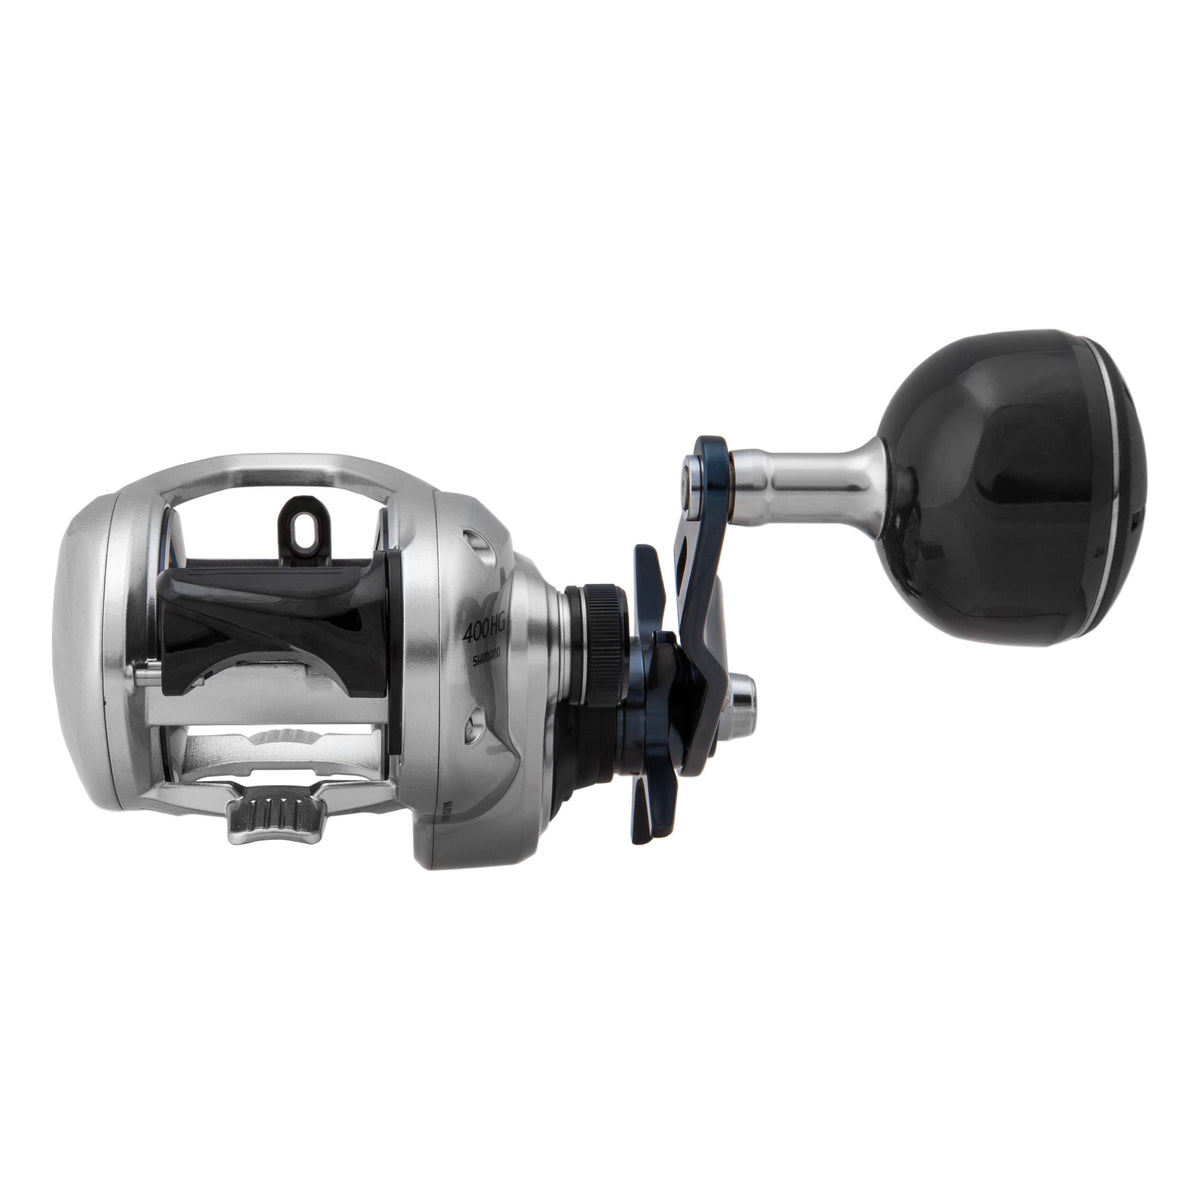 Explore our selection to find Shimano Tranx 400HG Baitcast Reel Shimano  products at reasonable prices